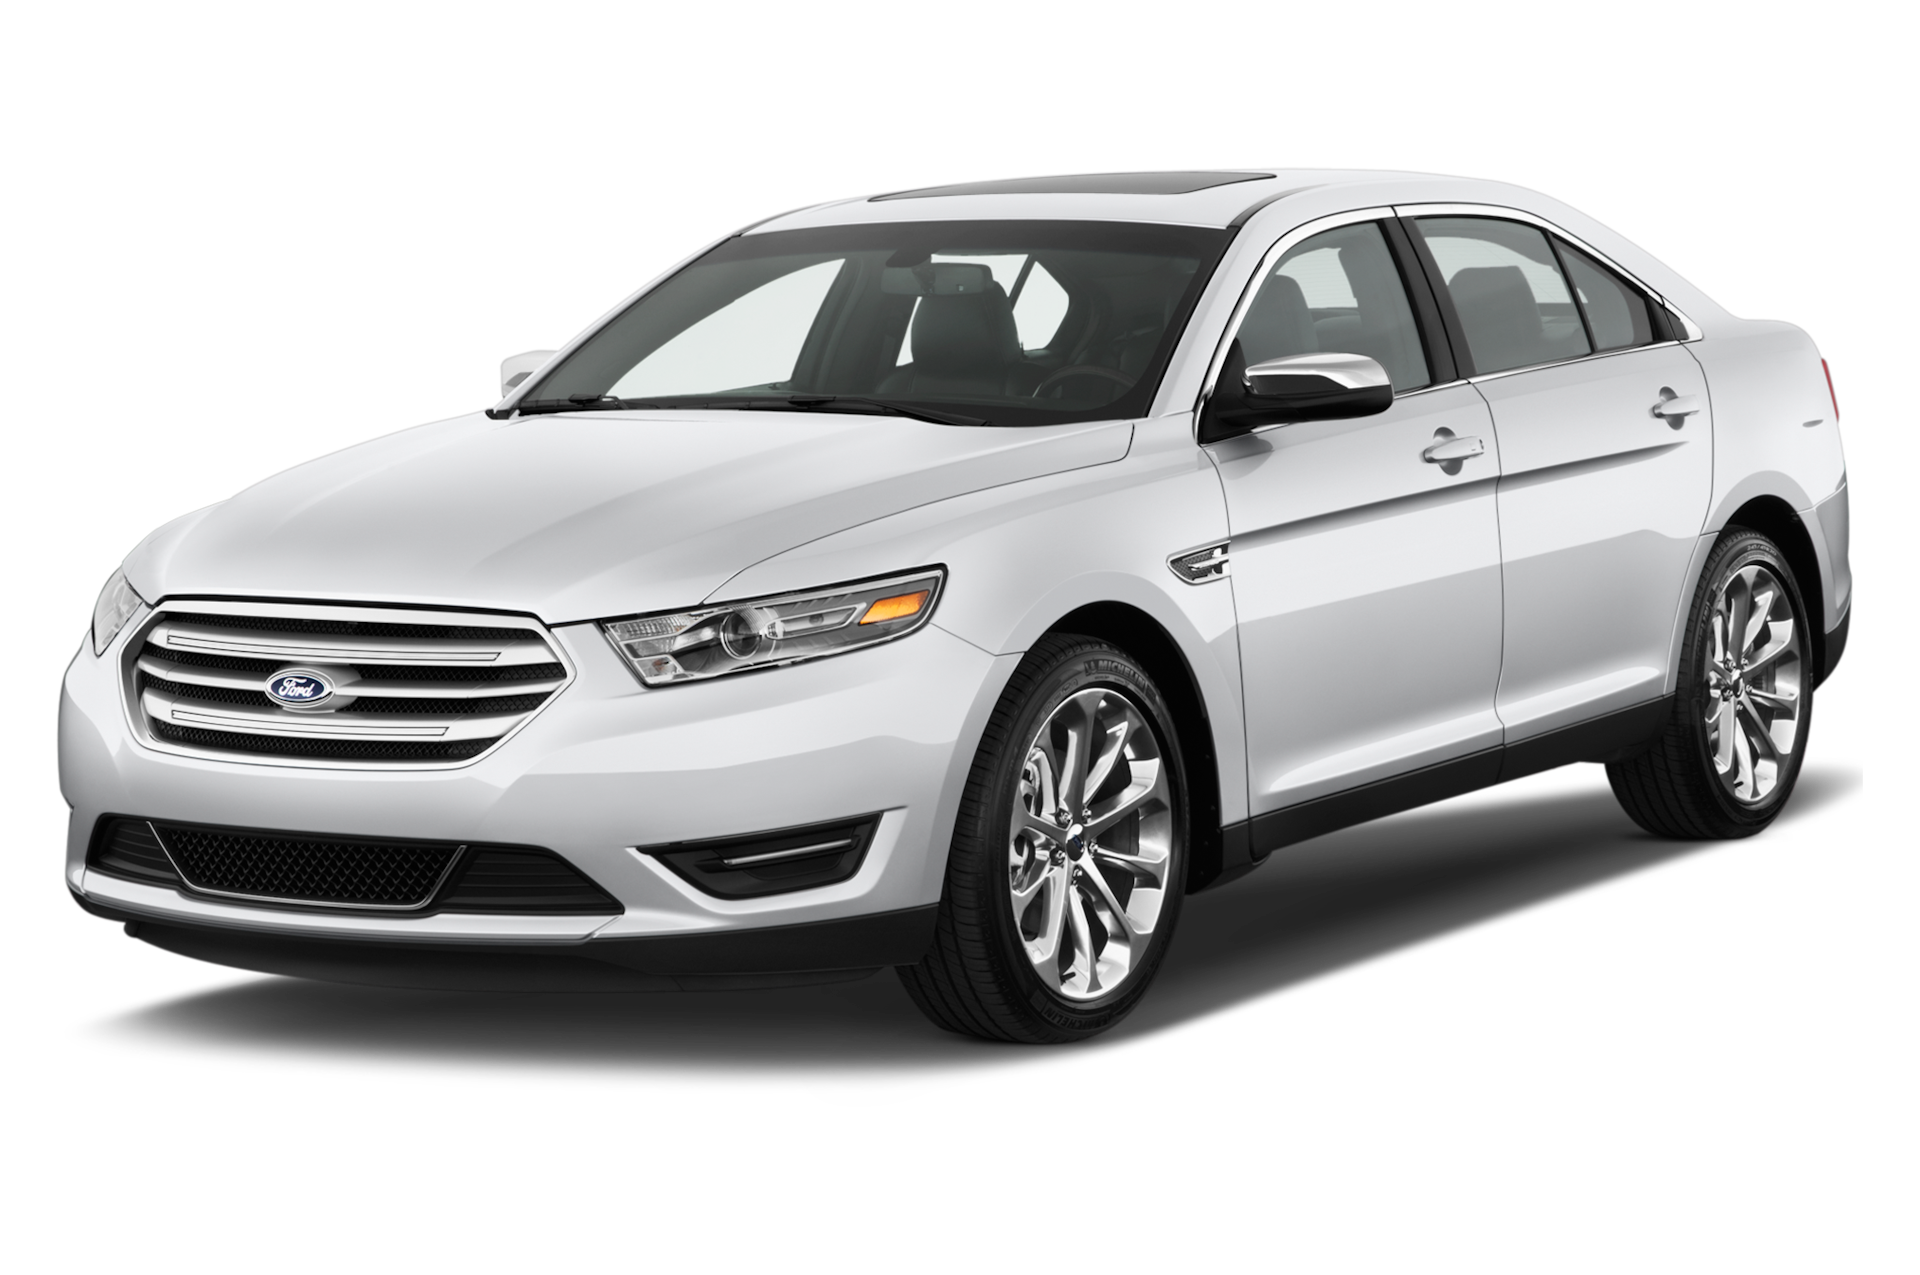 2014 Ford Taurus Prices, Reviews, and Photos - MotorTrend